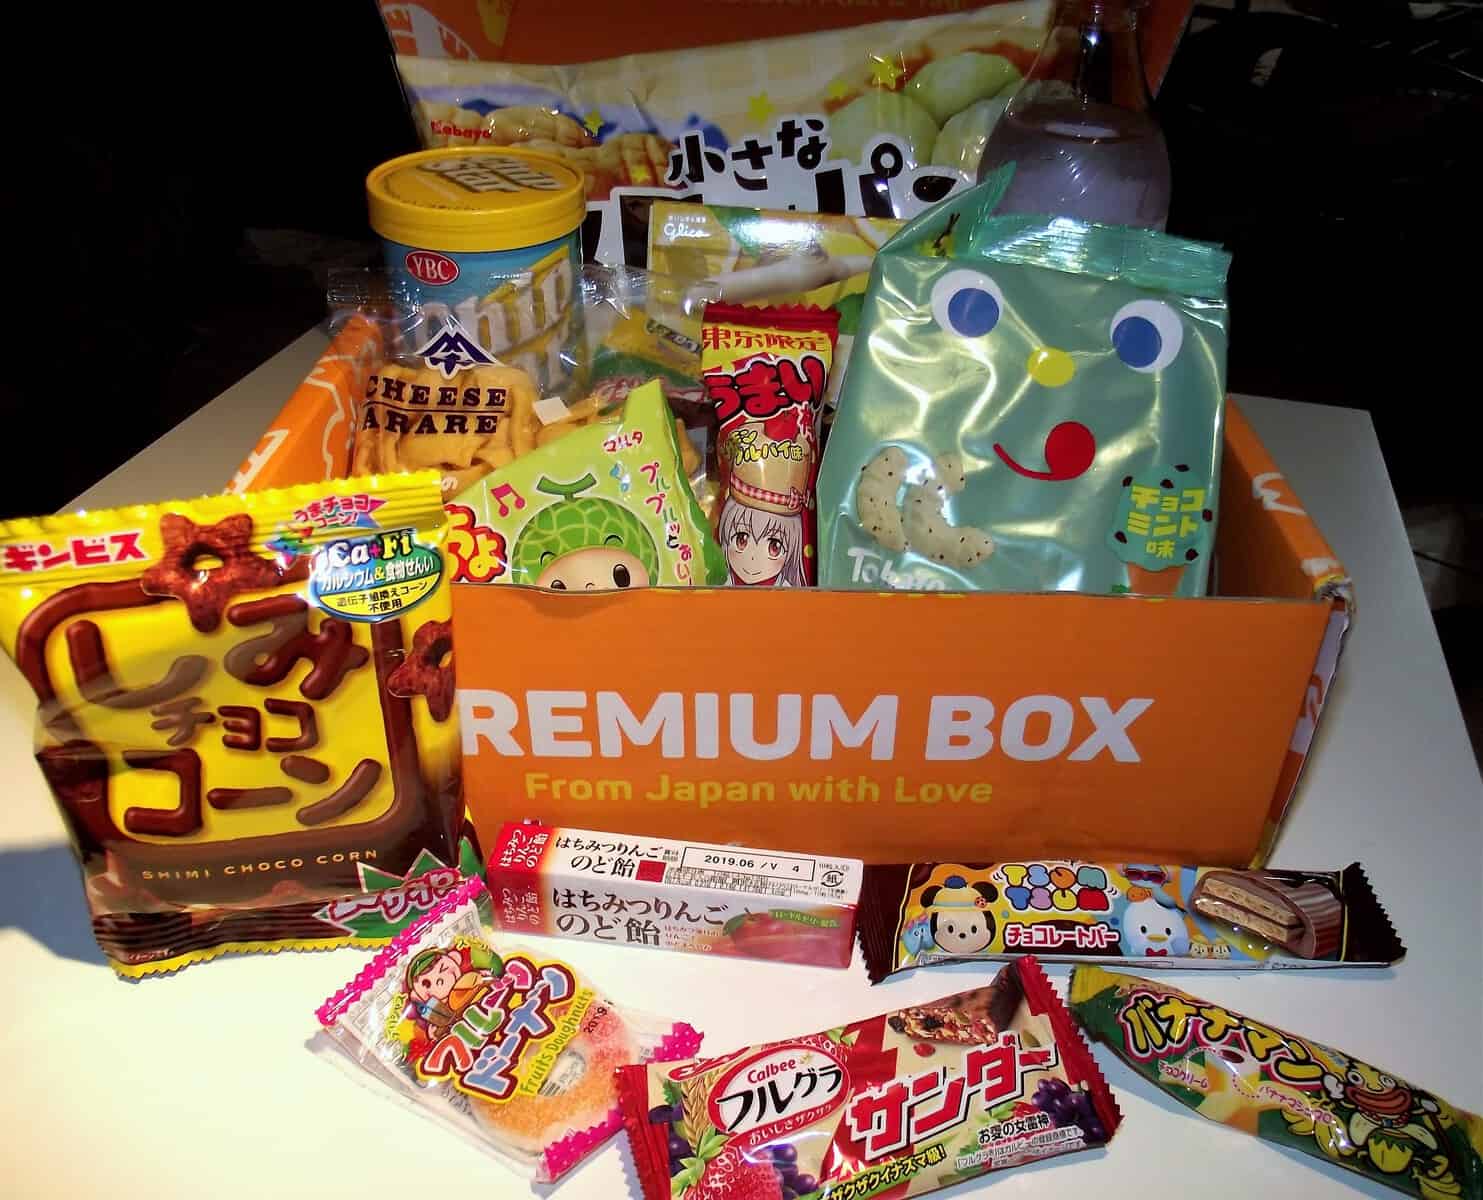 Tokyo Treat  Find Subscription Boxes